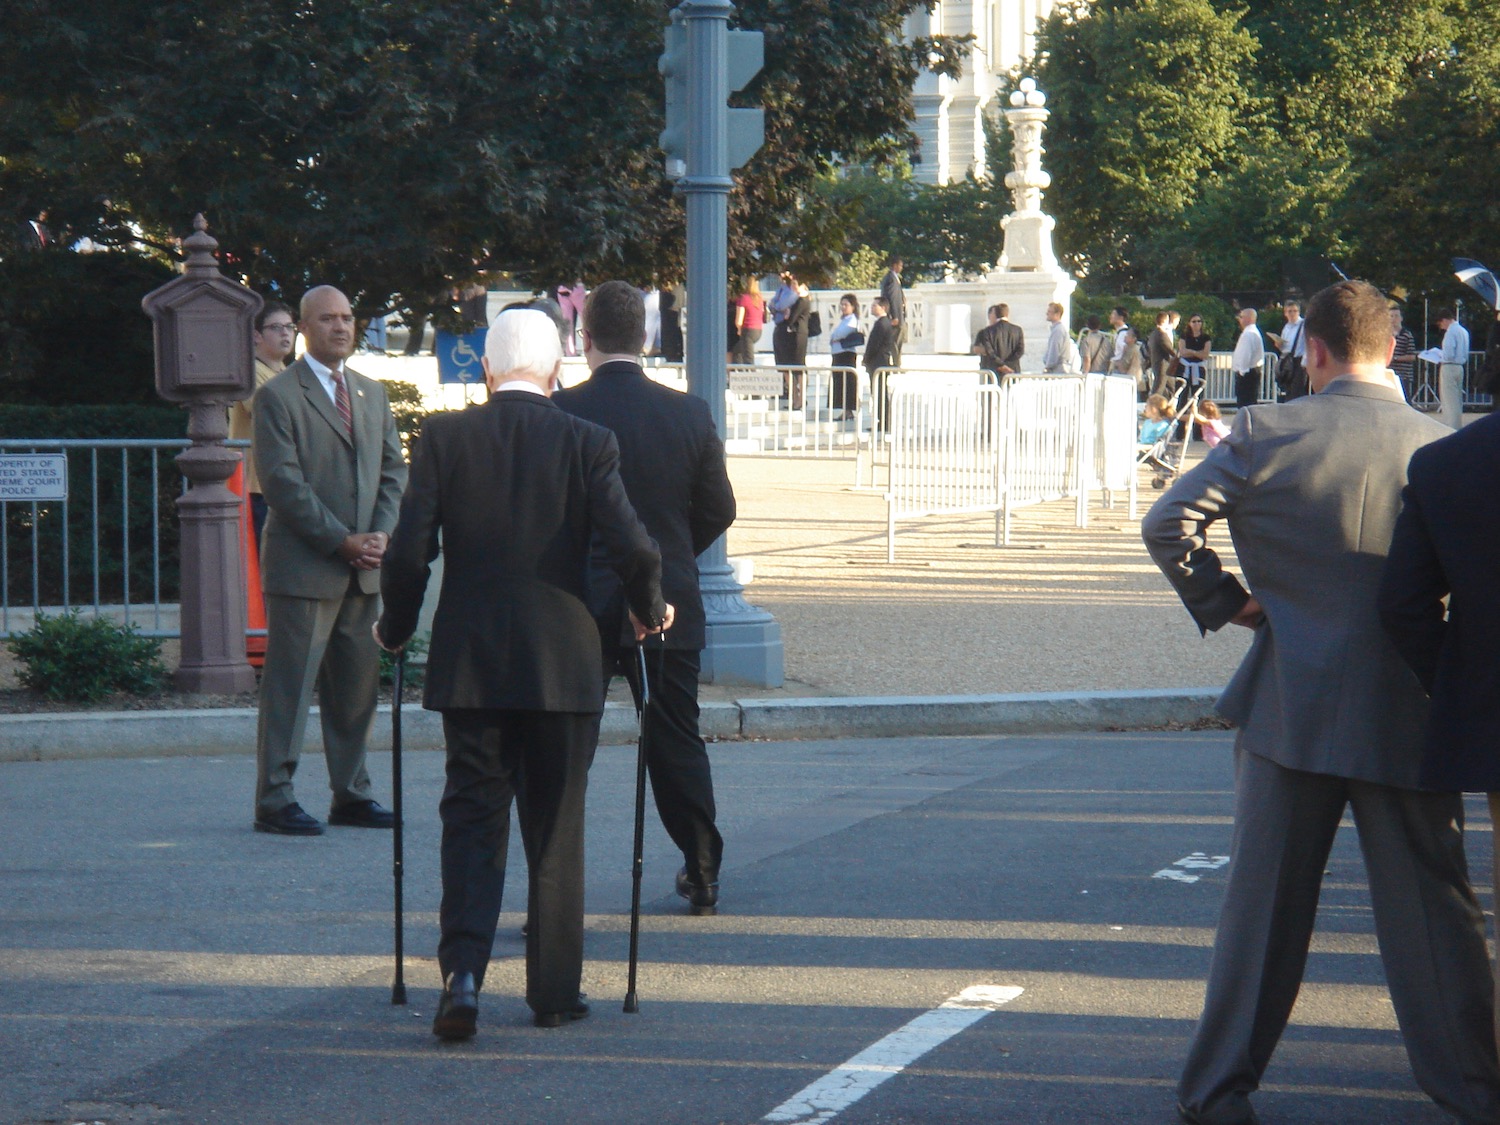 a group of men in suits walking on a street